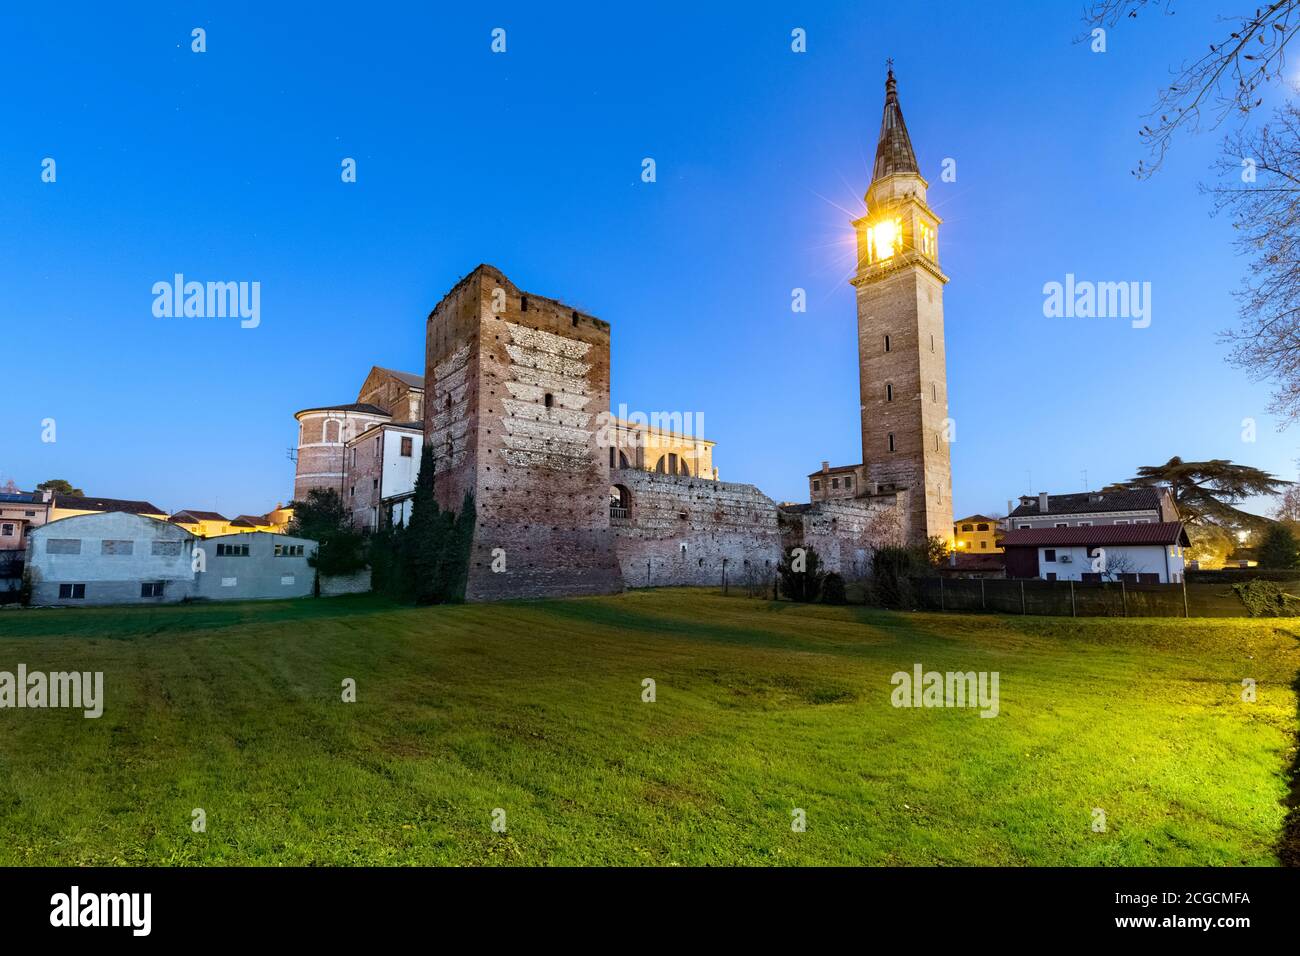 Cologna Veneta: the Scaliger tower and the bell tower (one of the highest in Italy). Verona province, Veneto, Italy, Europe. Stock Photo